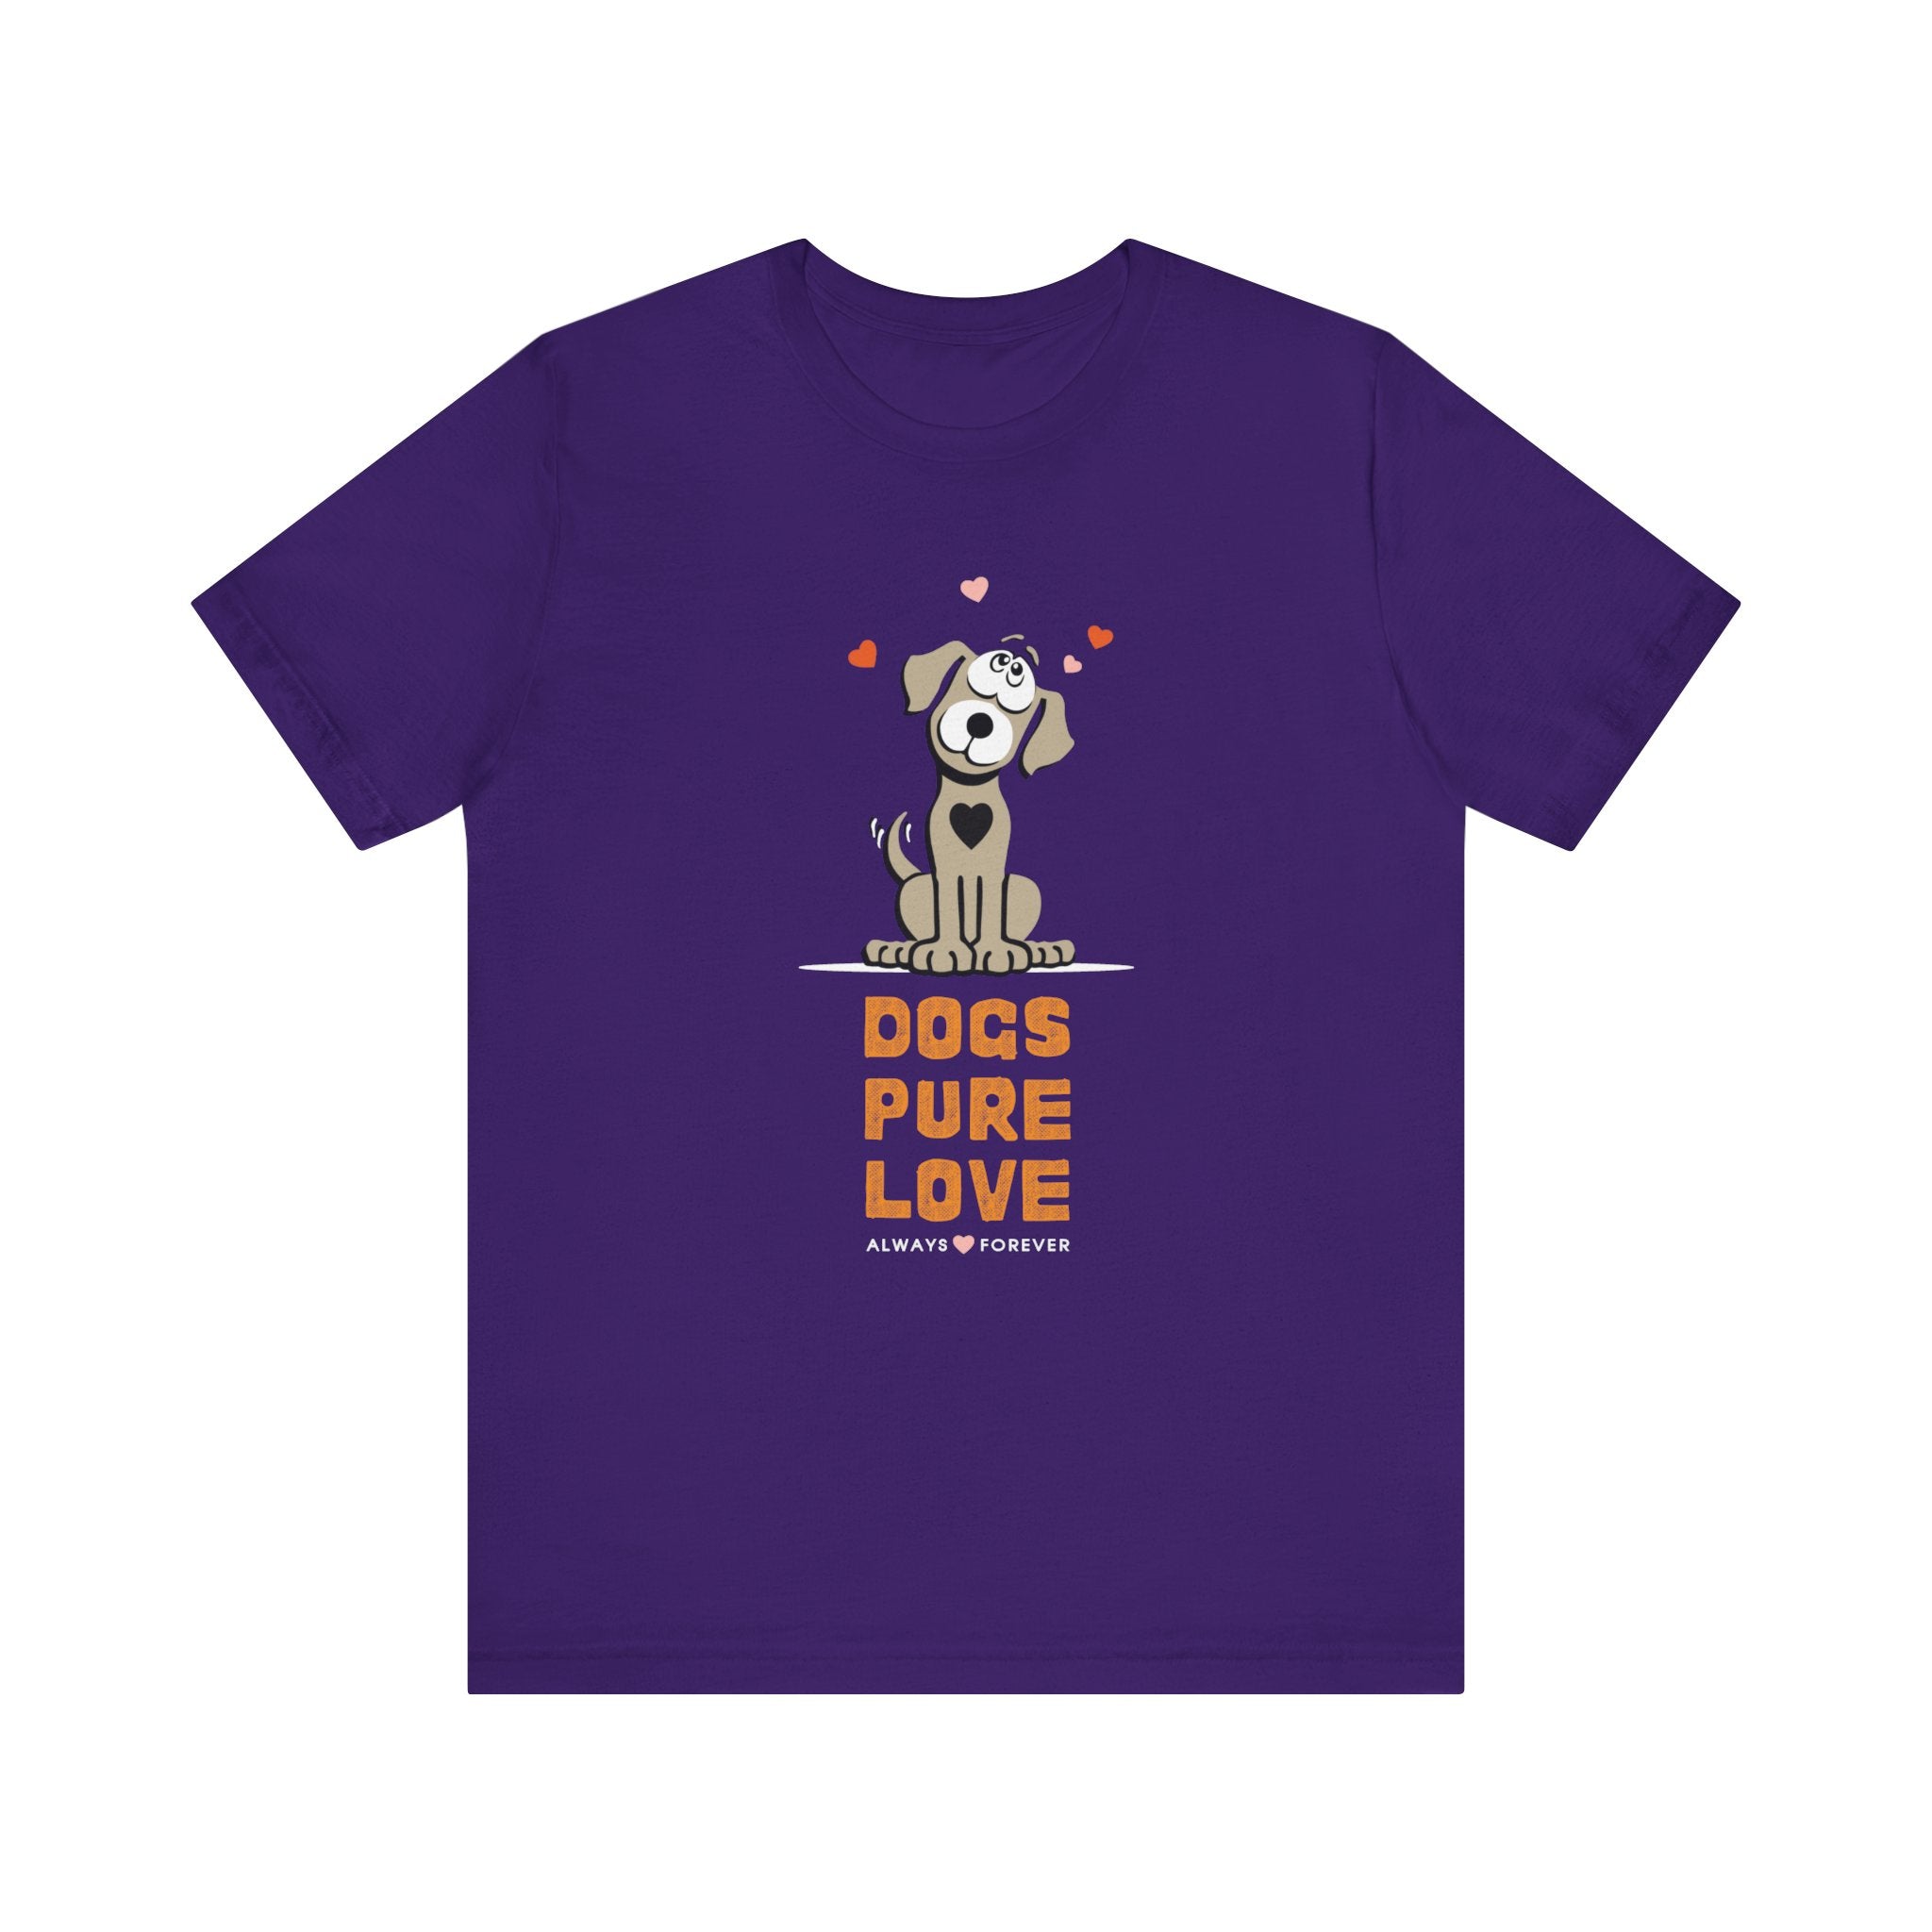 A team purple unisex tee shows off the Dogs Pure Love logo, against a white canvas.